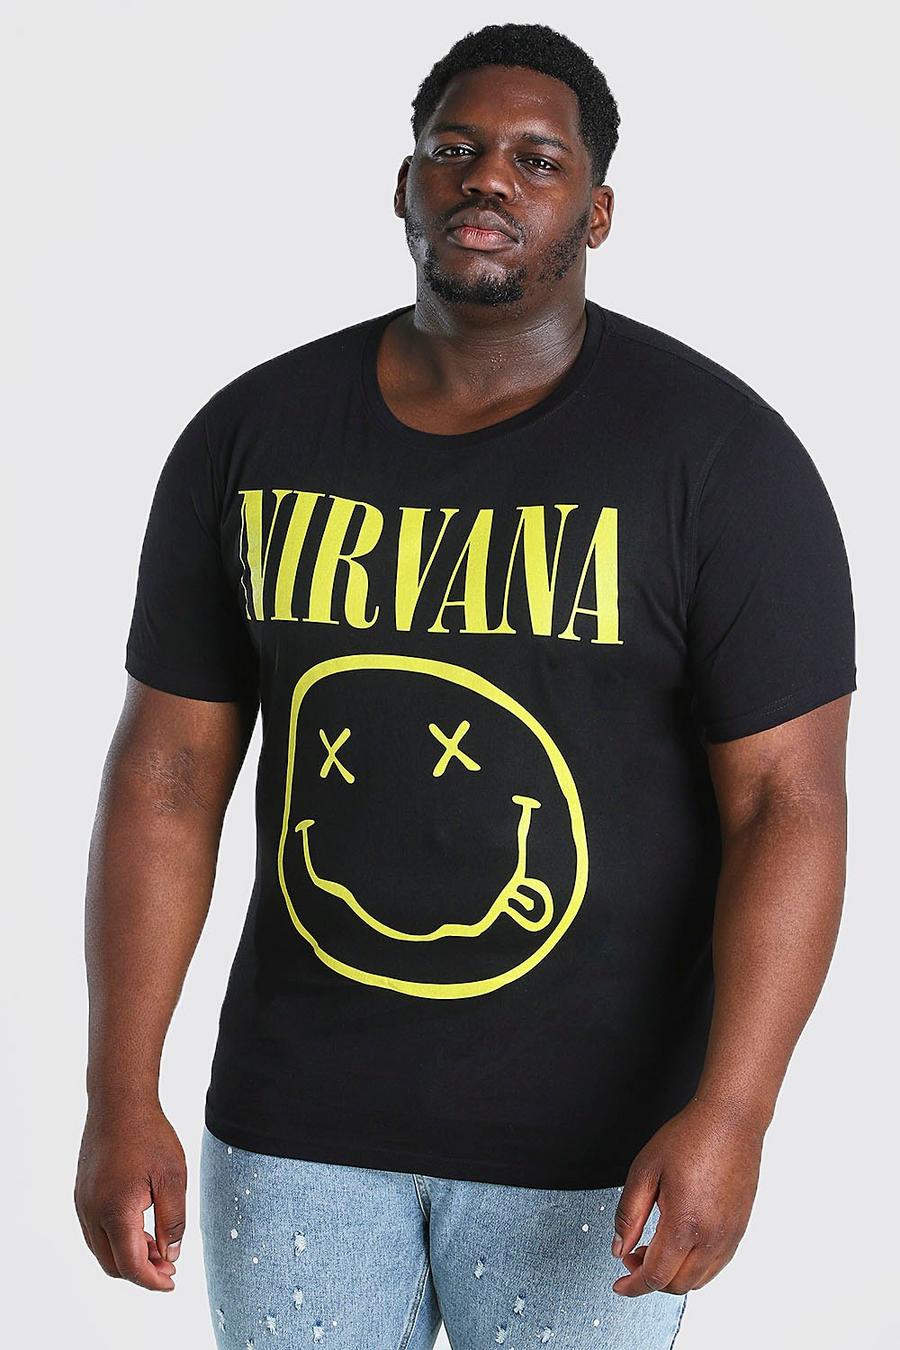 T-shirt Big And Tall ufficiale dei Nirvana con logo, Nero image number 1